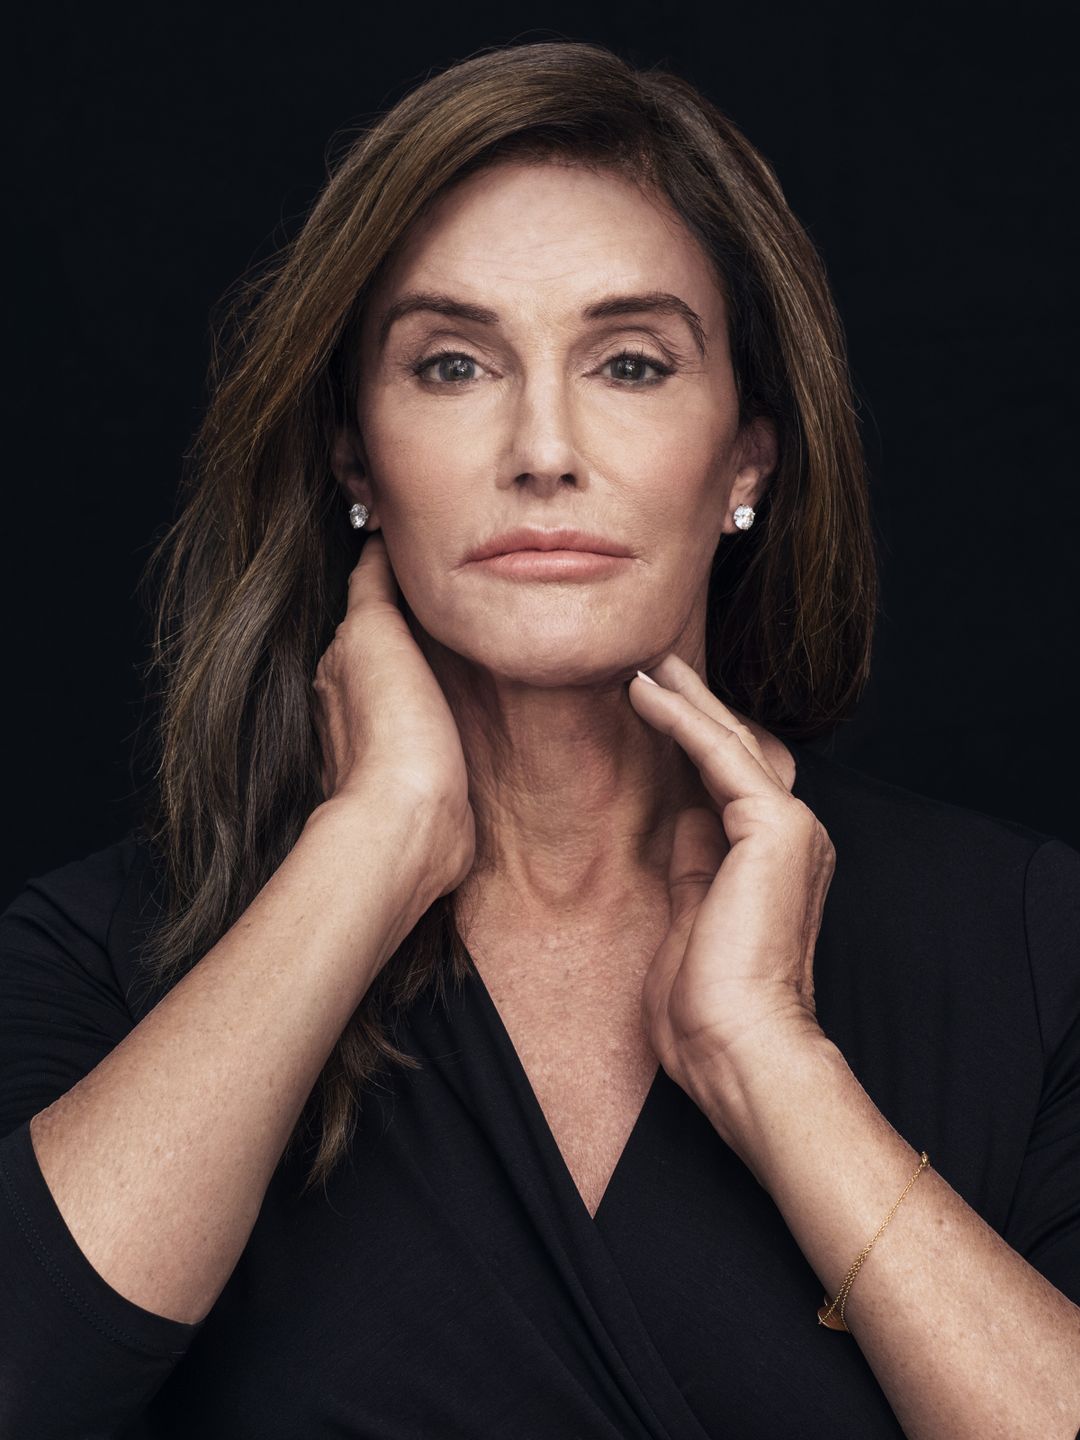 Caitlyn Jenner story of success